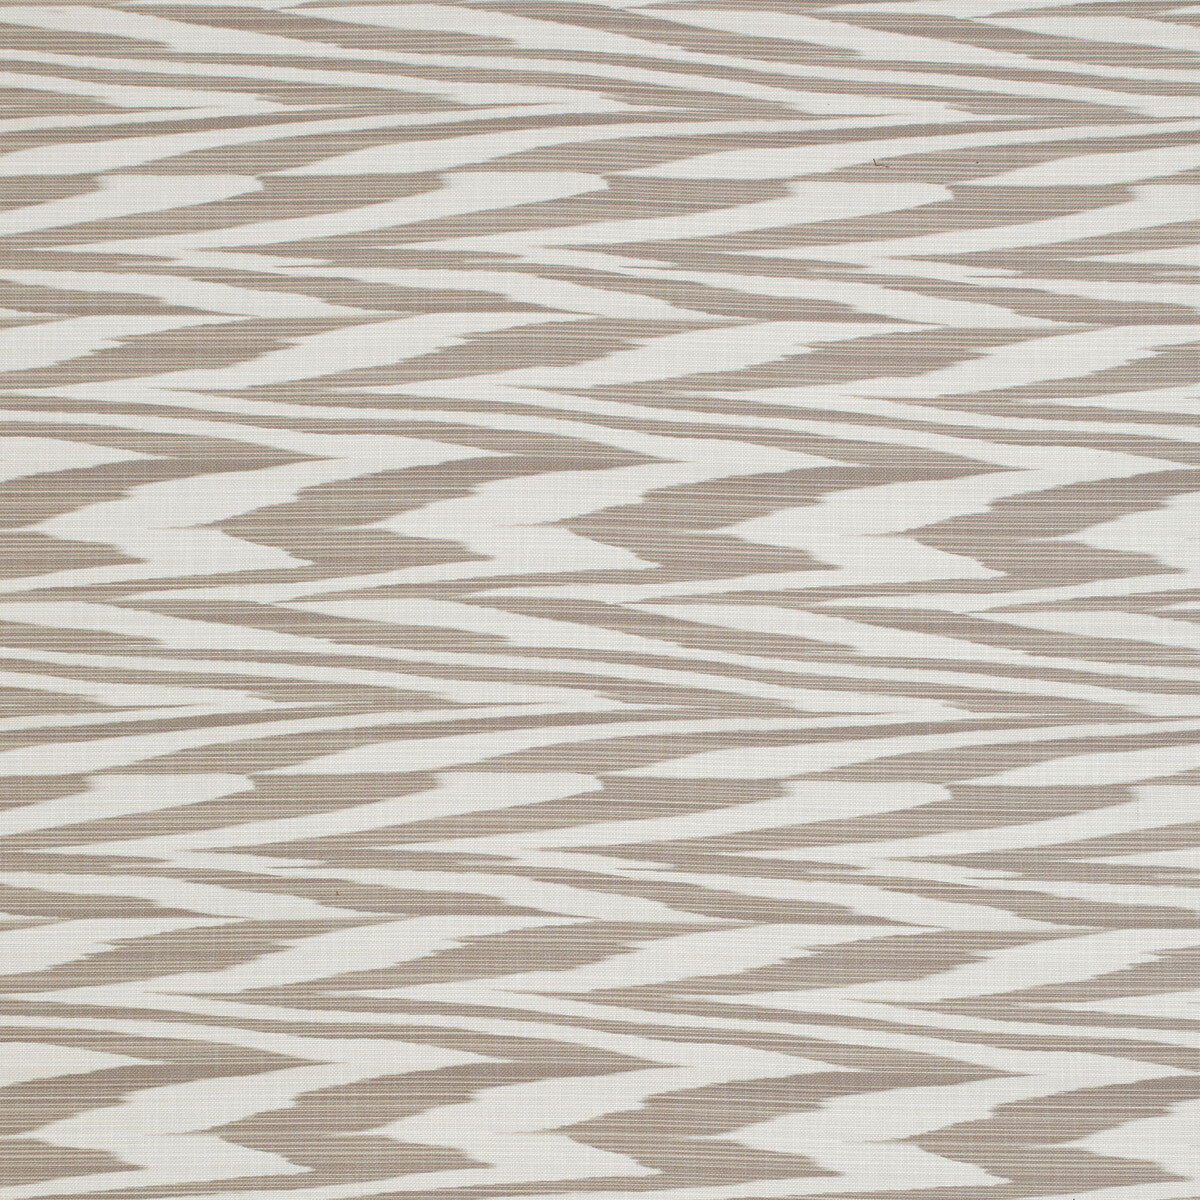 Atacama Outdoor fabric in 721 color - pattern 36156.106.0 - by Kravet Couture in the Missoni Home 2021 collection